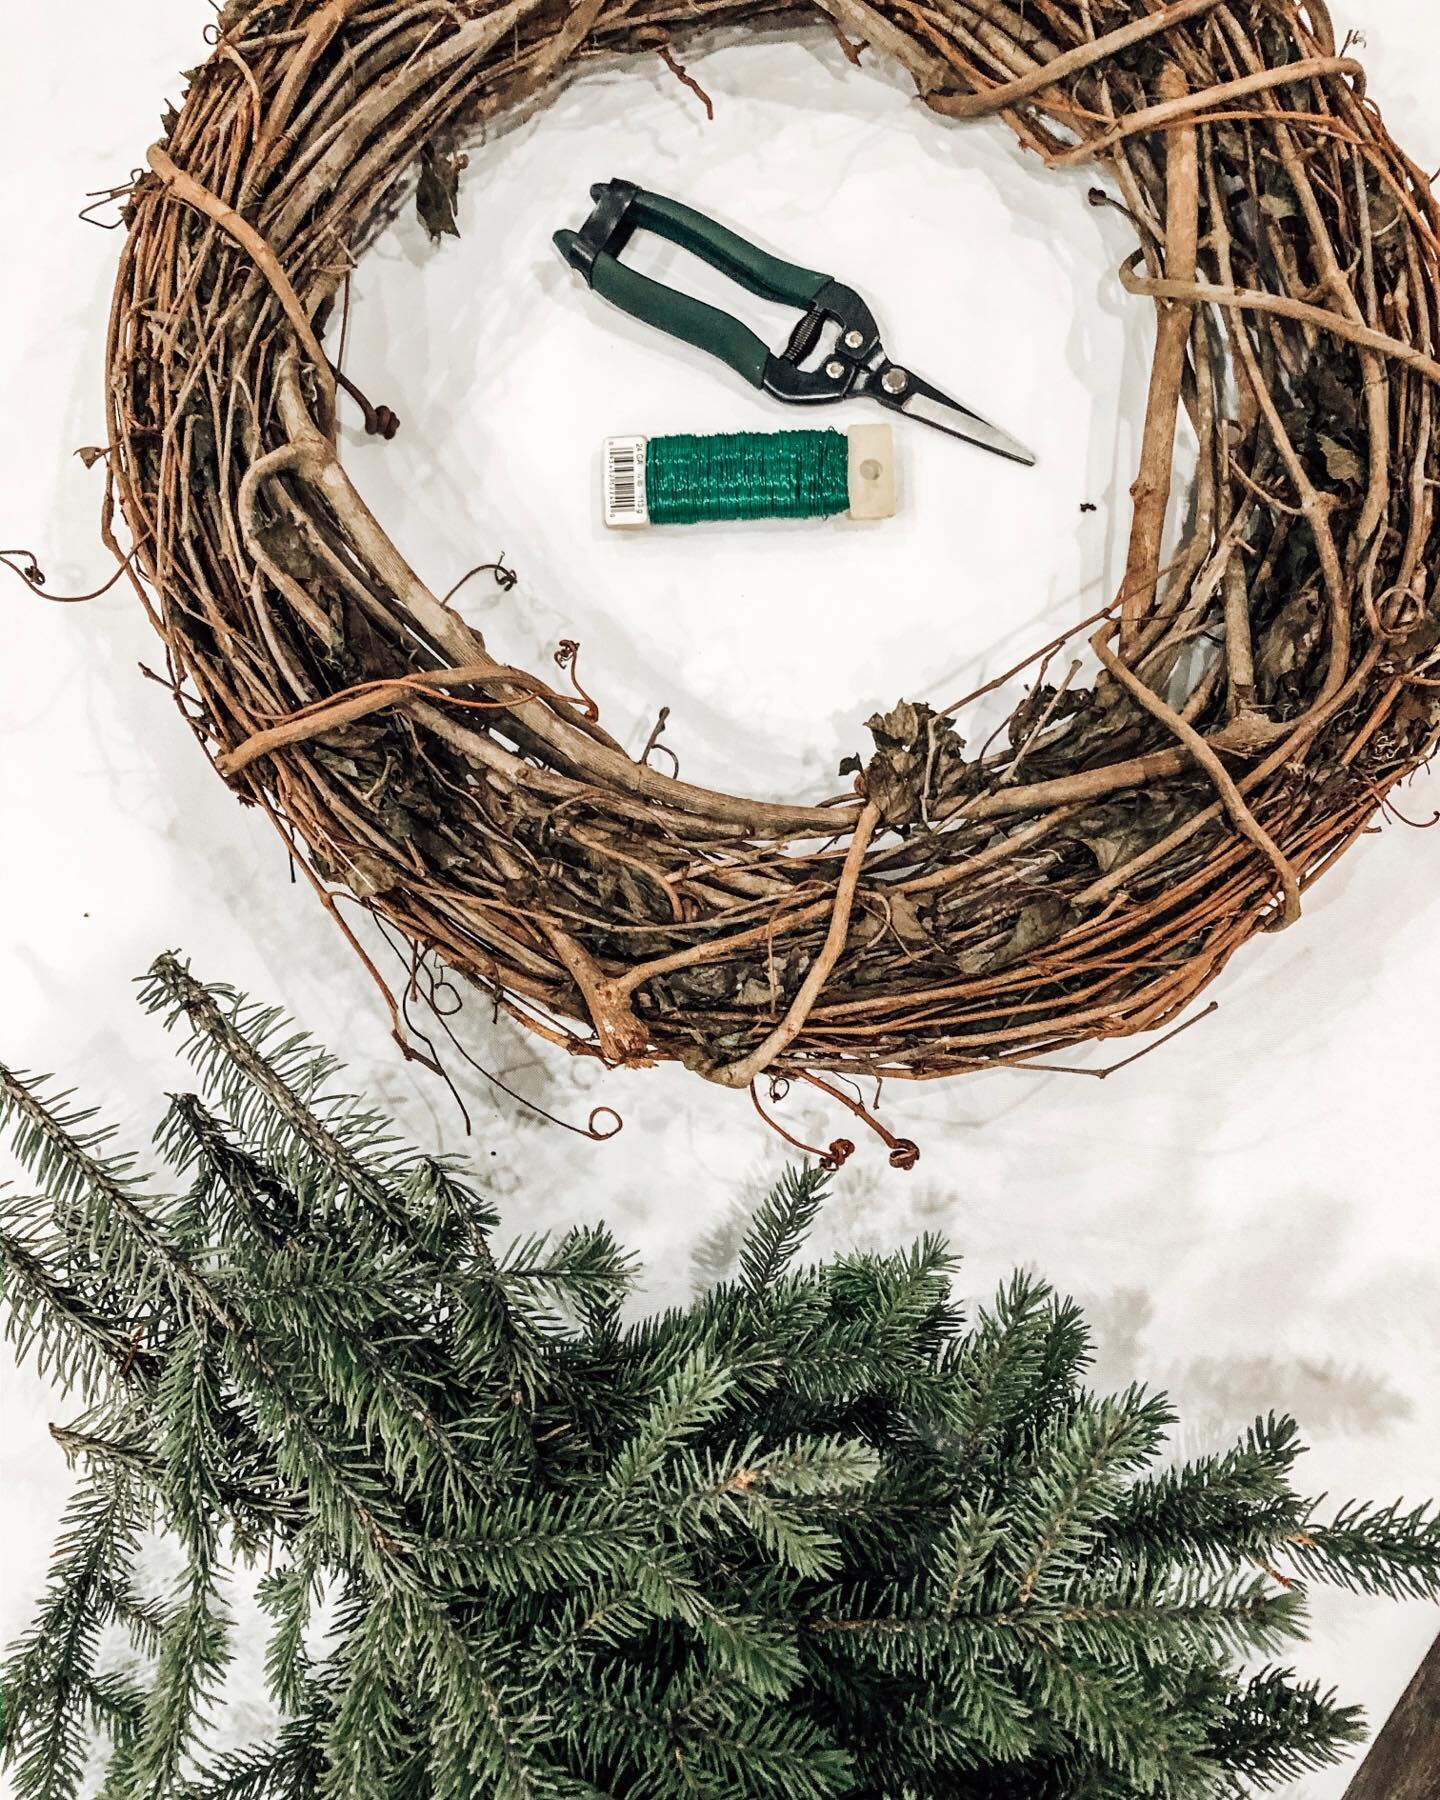 Later today our winter wreath orders will go live and pickup will be this weekend! There will be a variety of evergreen wreaths with all natural ingredients, everlasting dried wreaths and wreaths with ornament embellishments. I&rsquo;ll also have a s